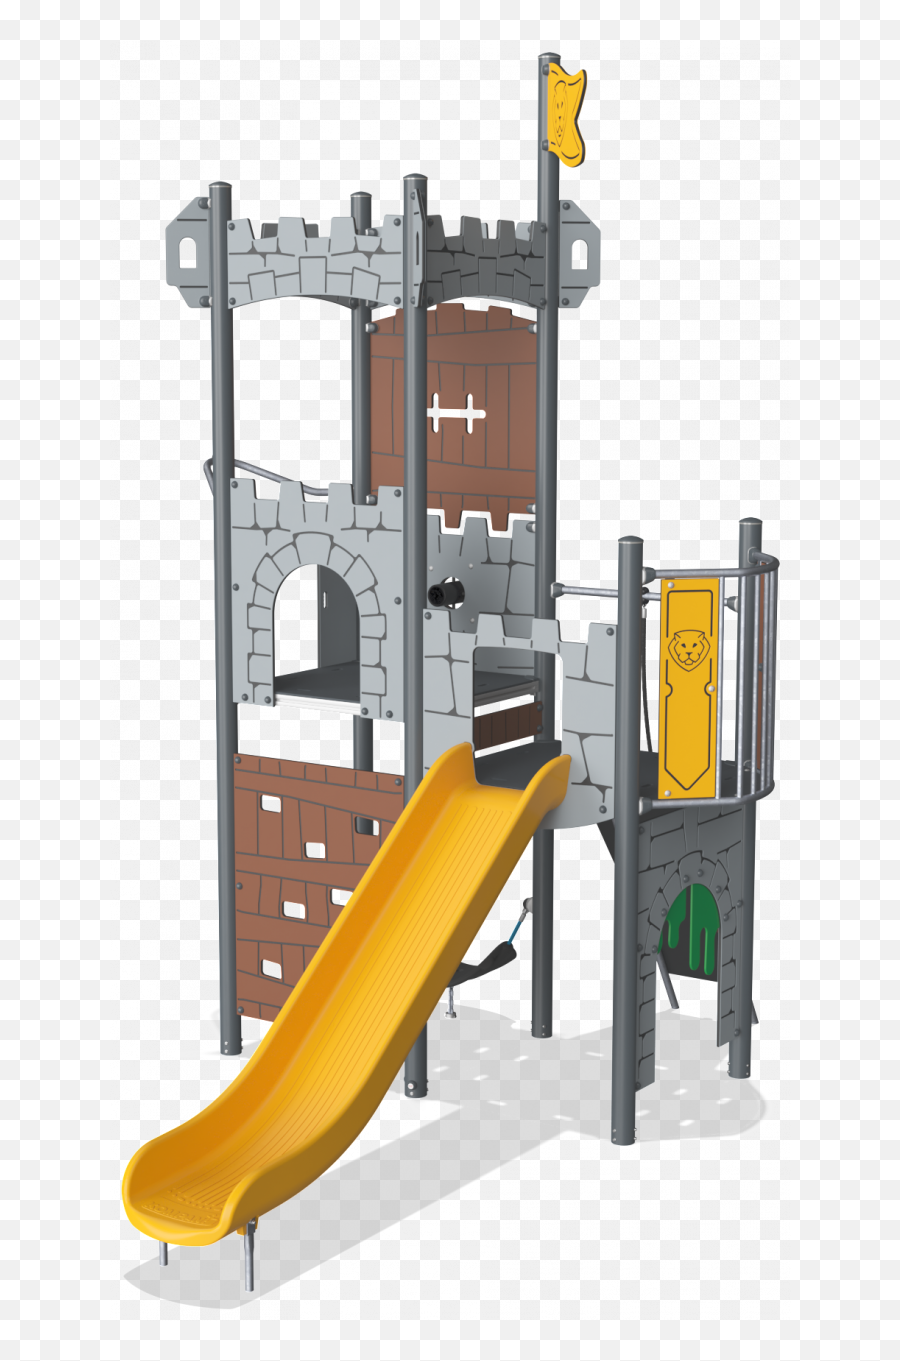 Castle Tower Png - Playground Slide,Castle Tower Png